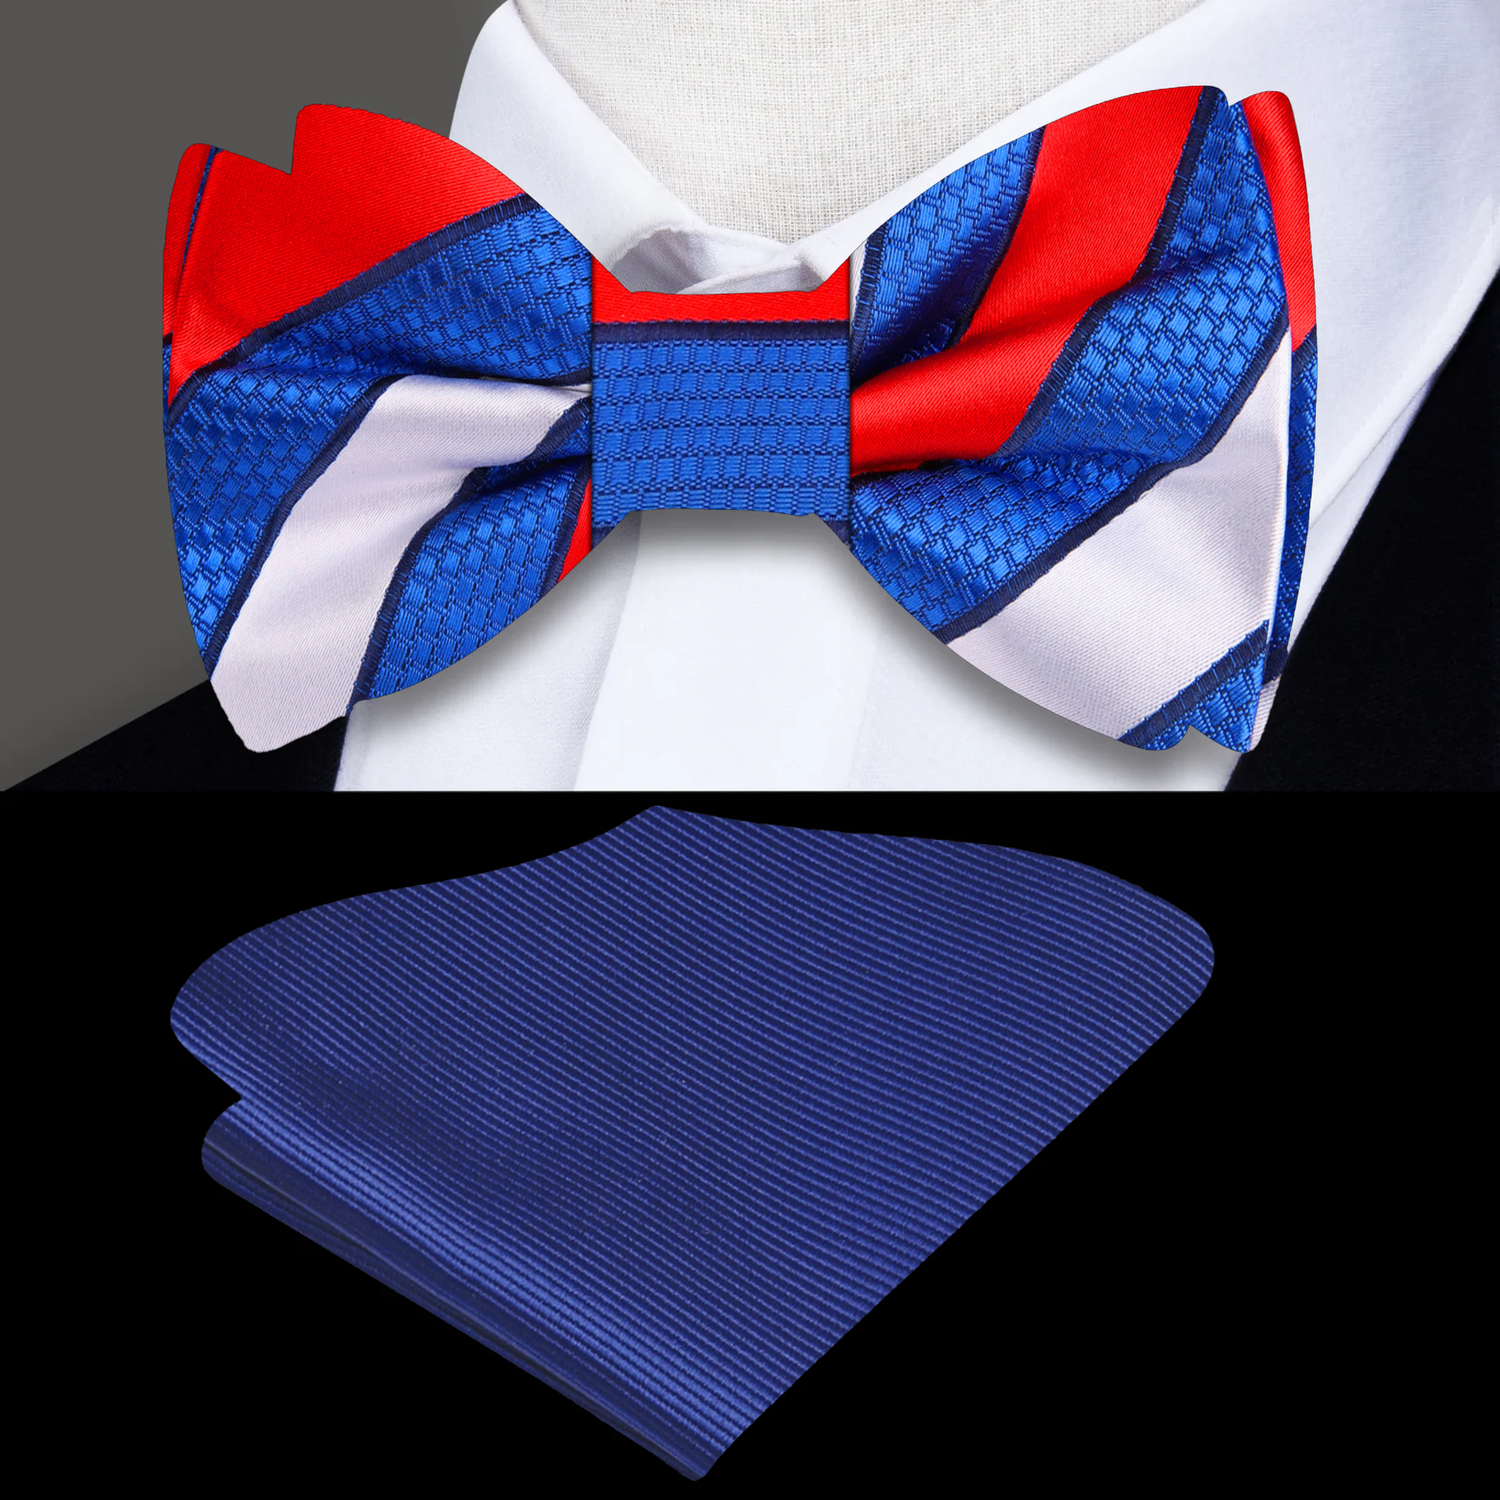 Red, White and Blue Block Stripe Bow Tie and Blue Square